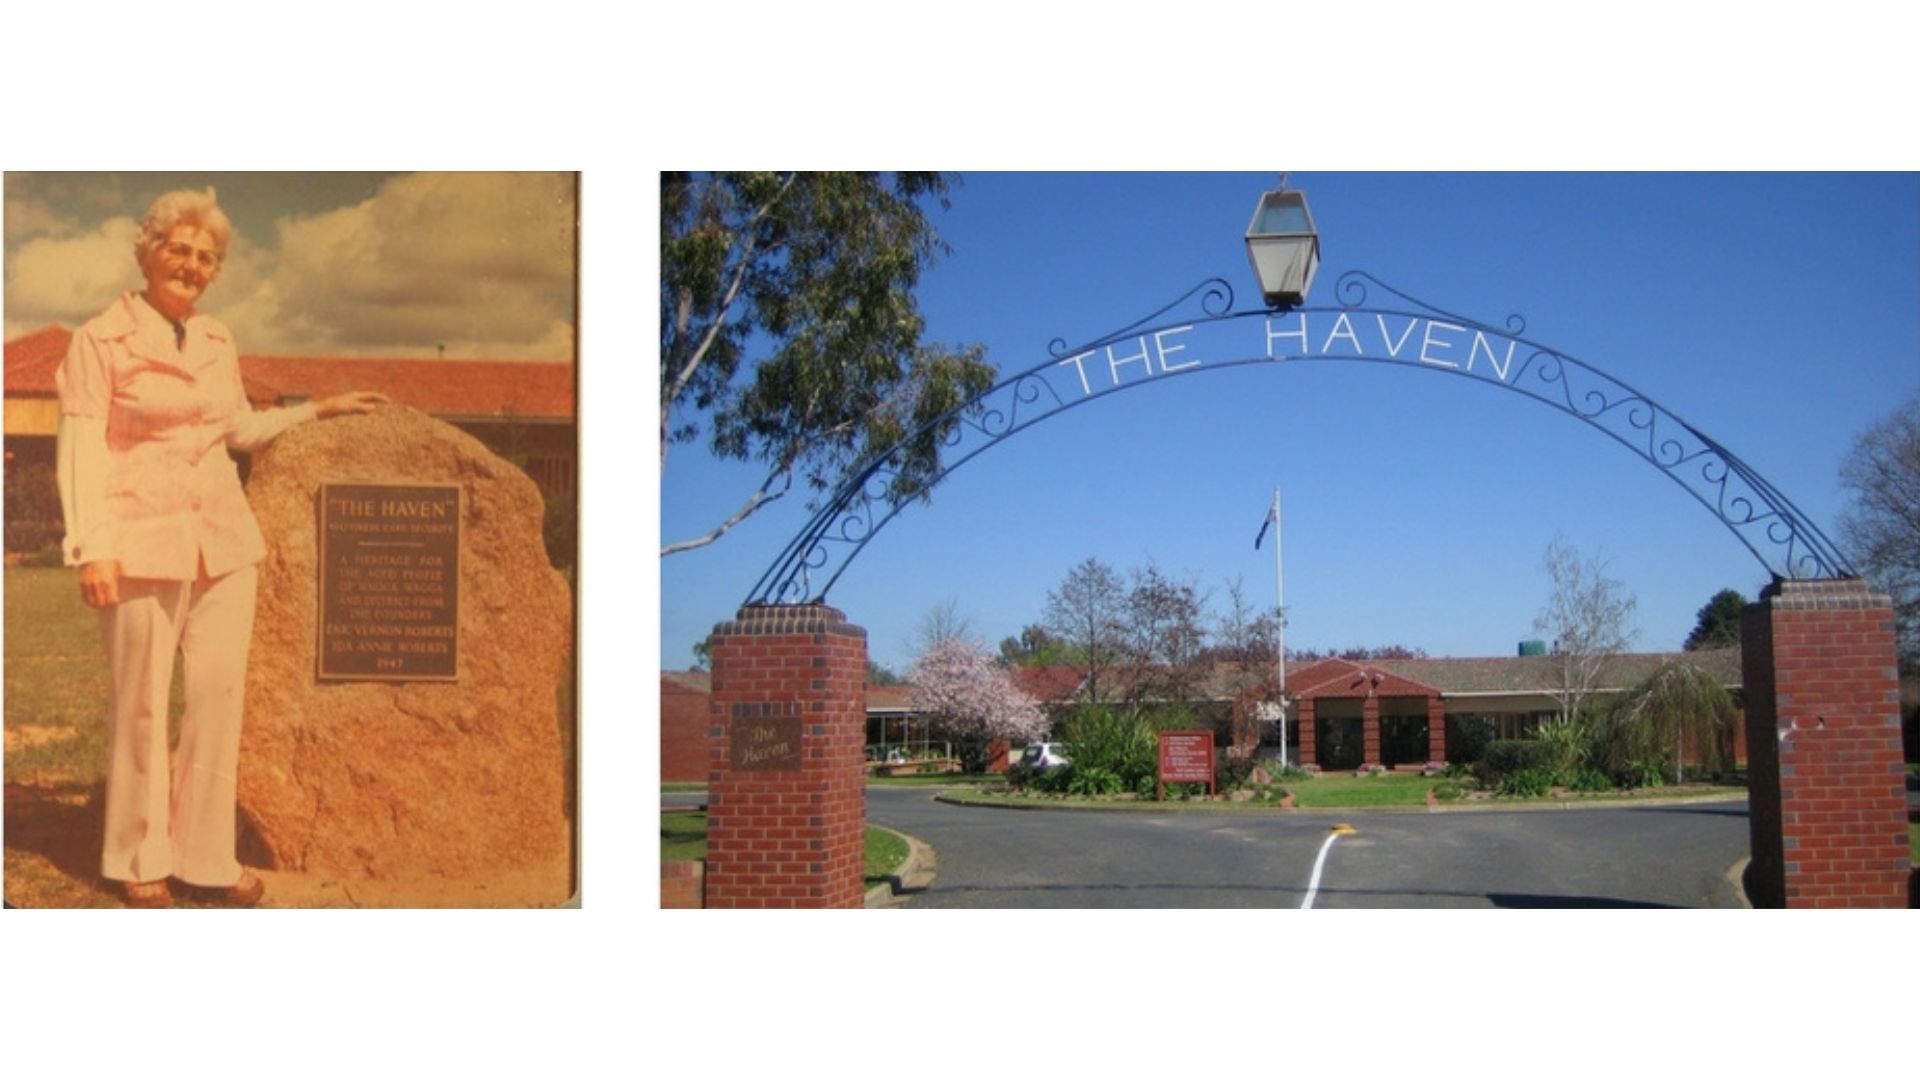 The Haven aged care facility in Wagga